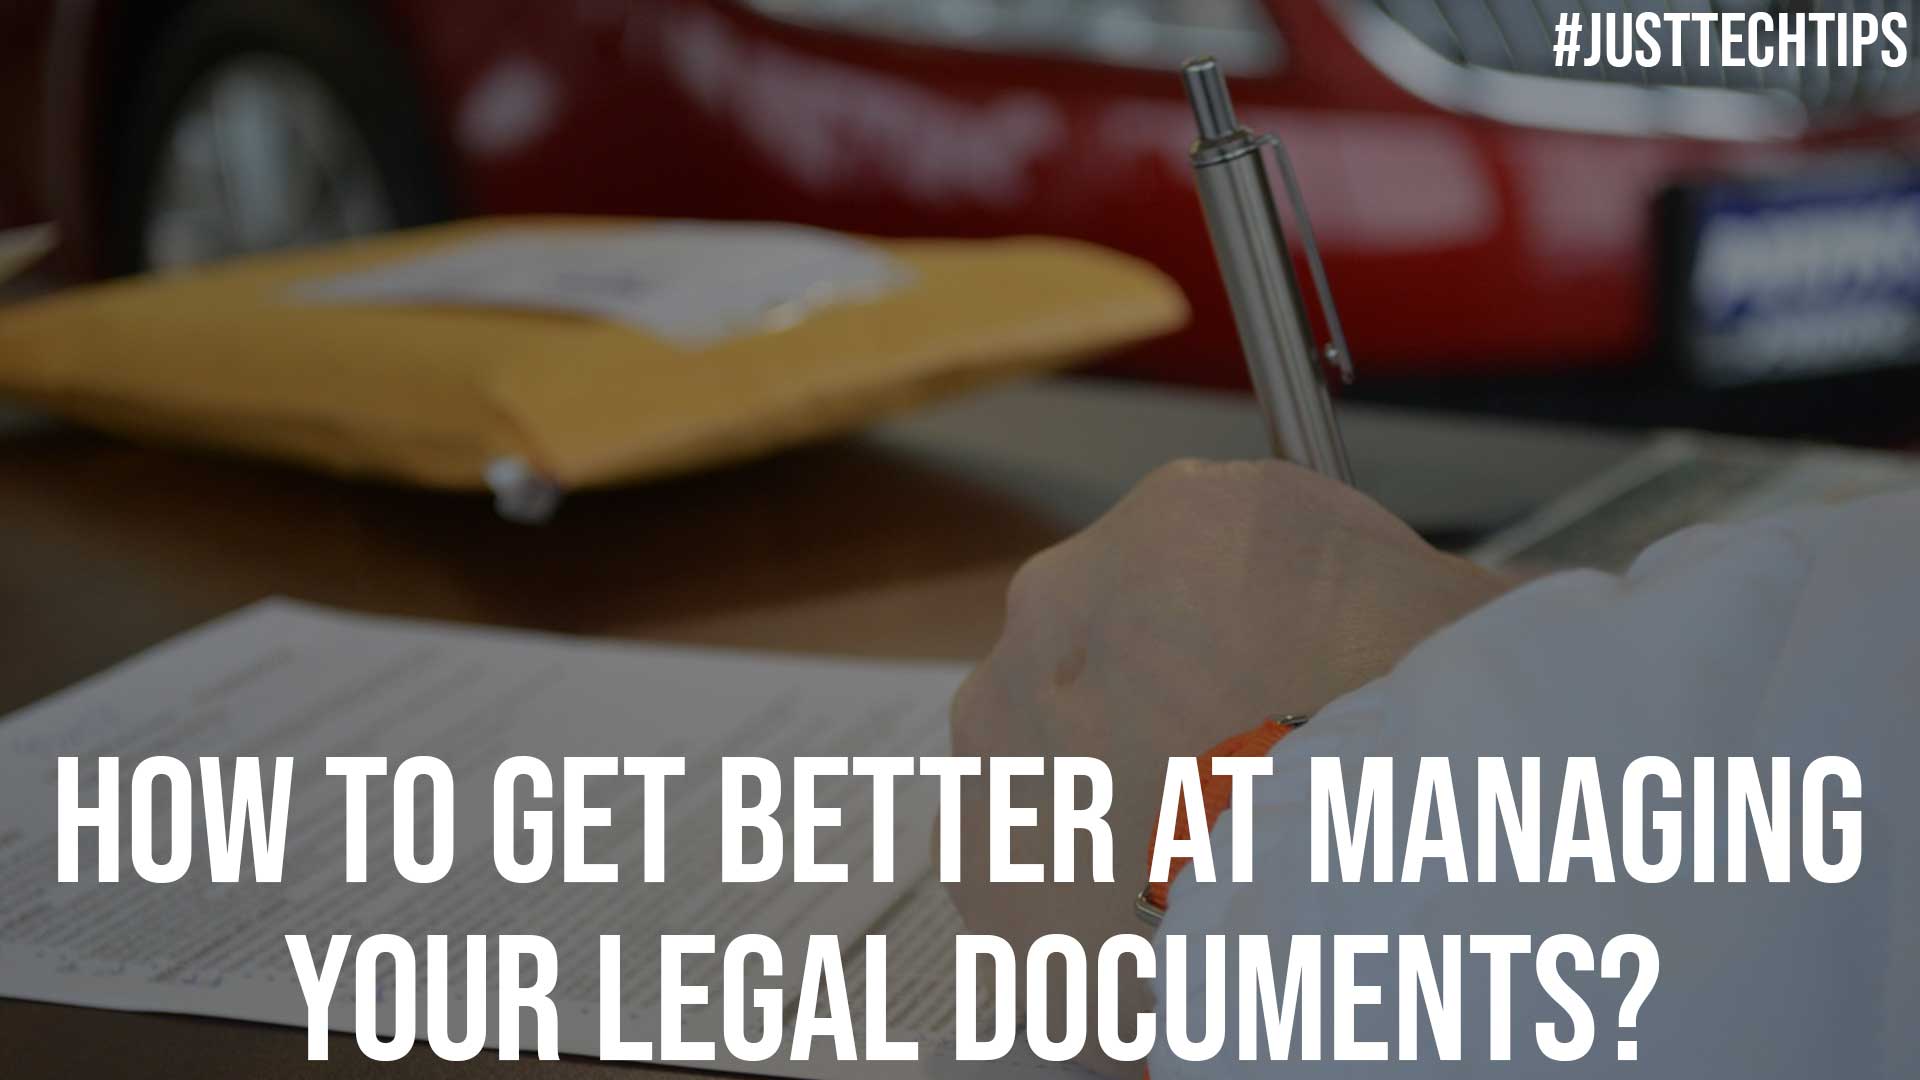 How To Get Better At Managing Your Legal Documents